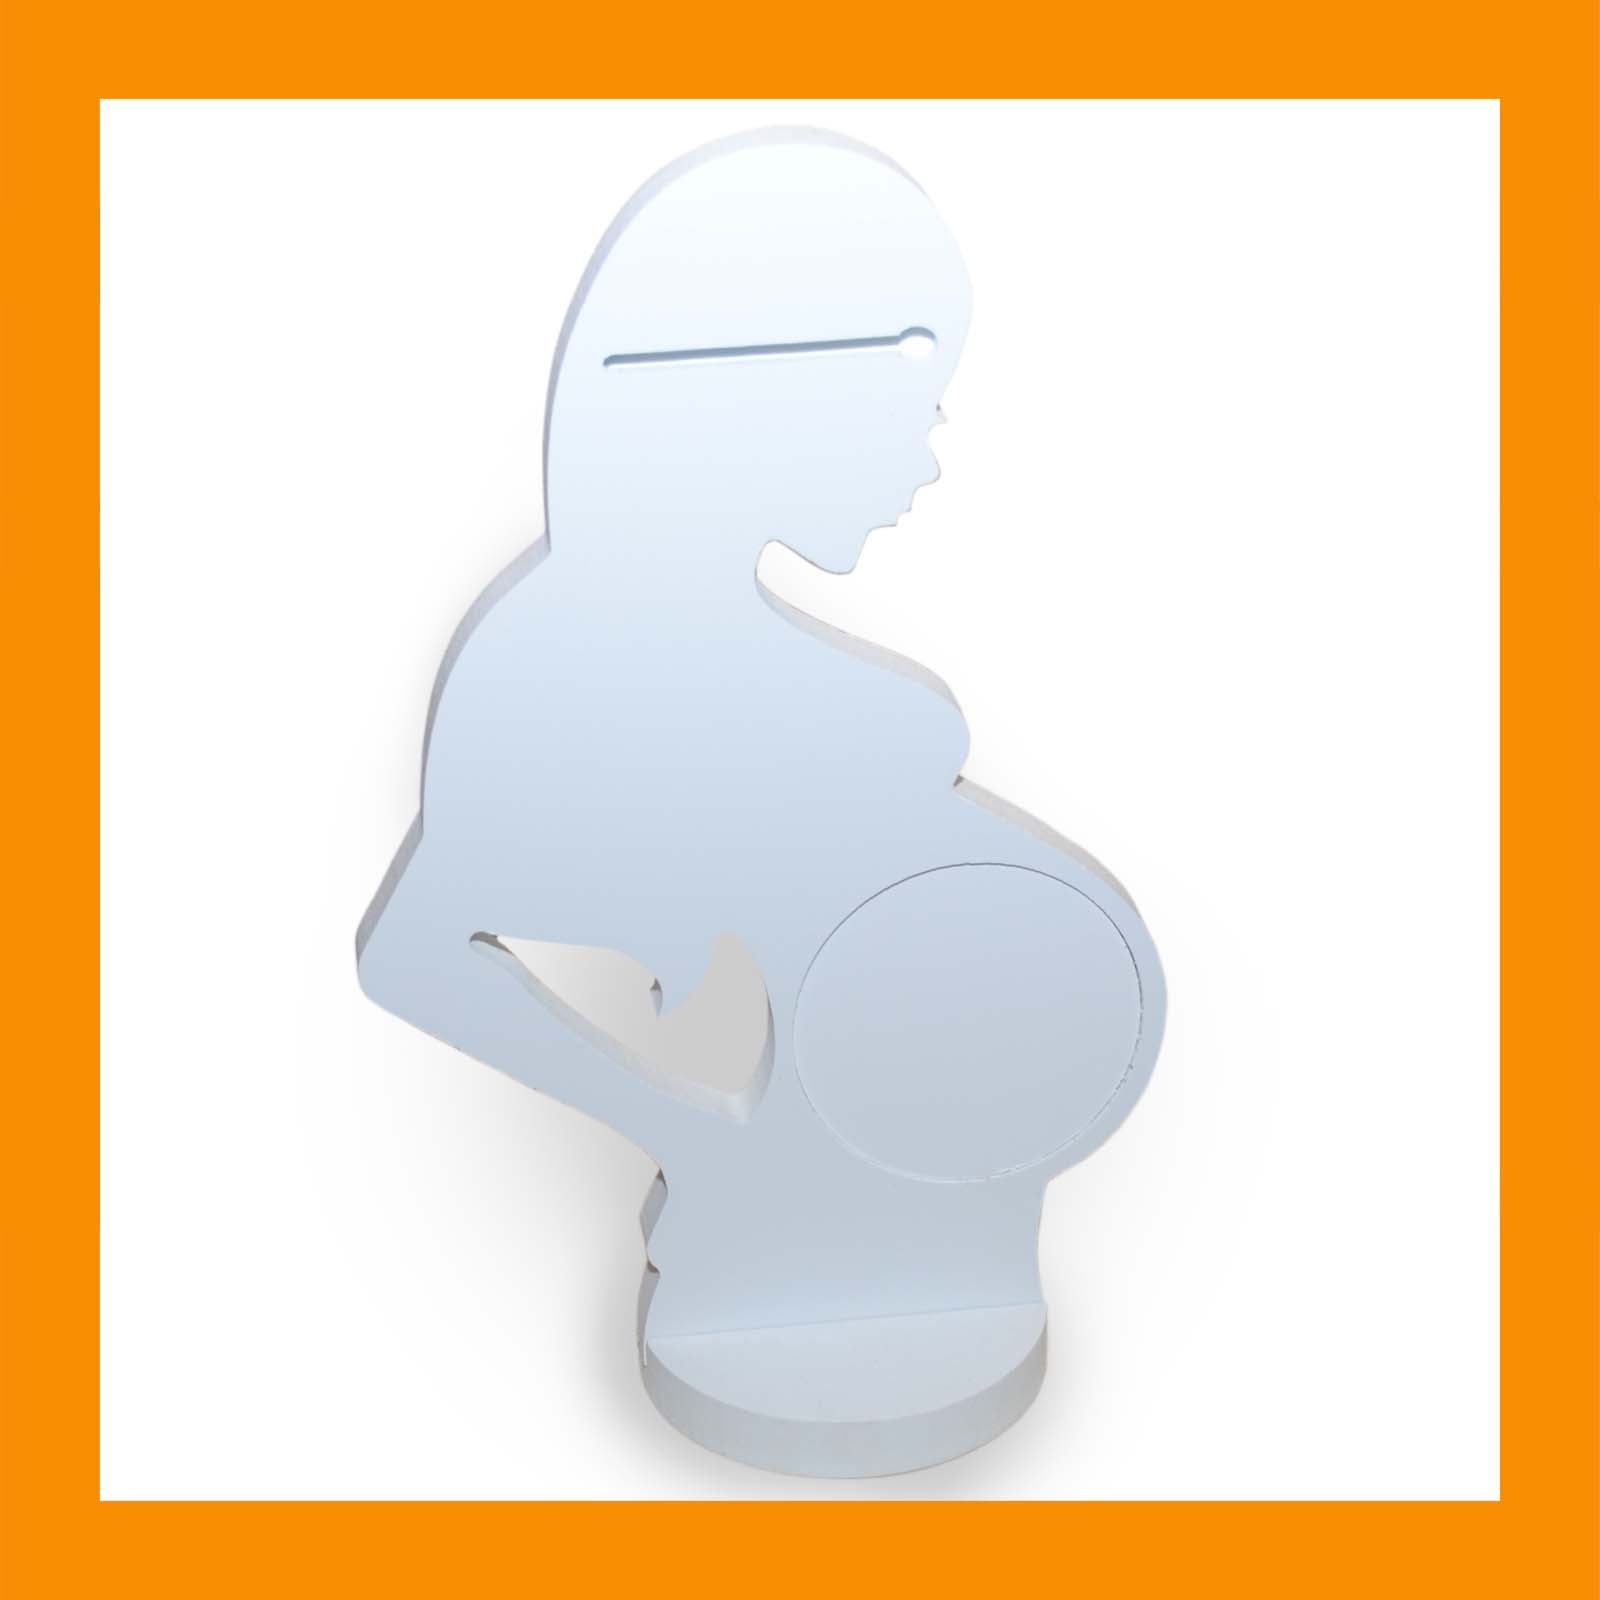 Ultrasound Frame Silhouette 14 5 Inches More Than A Handyman - free 30.00 robux pastebin.com